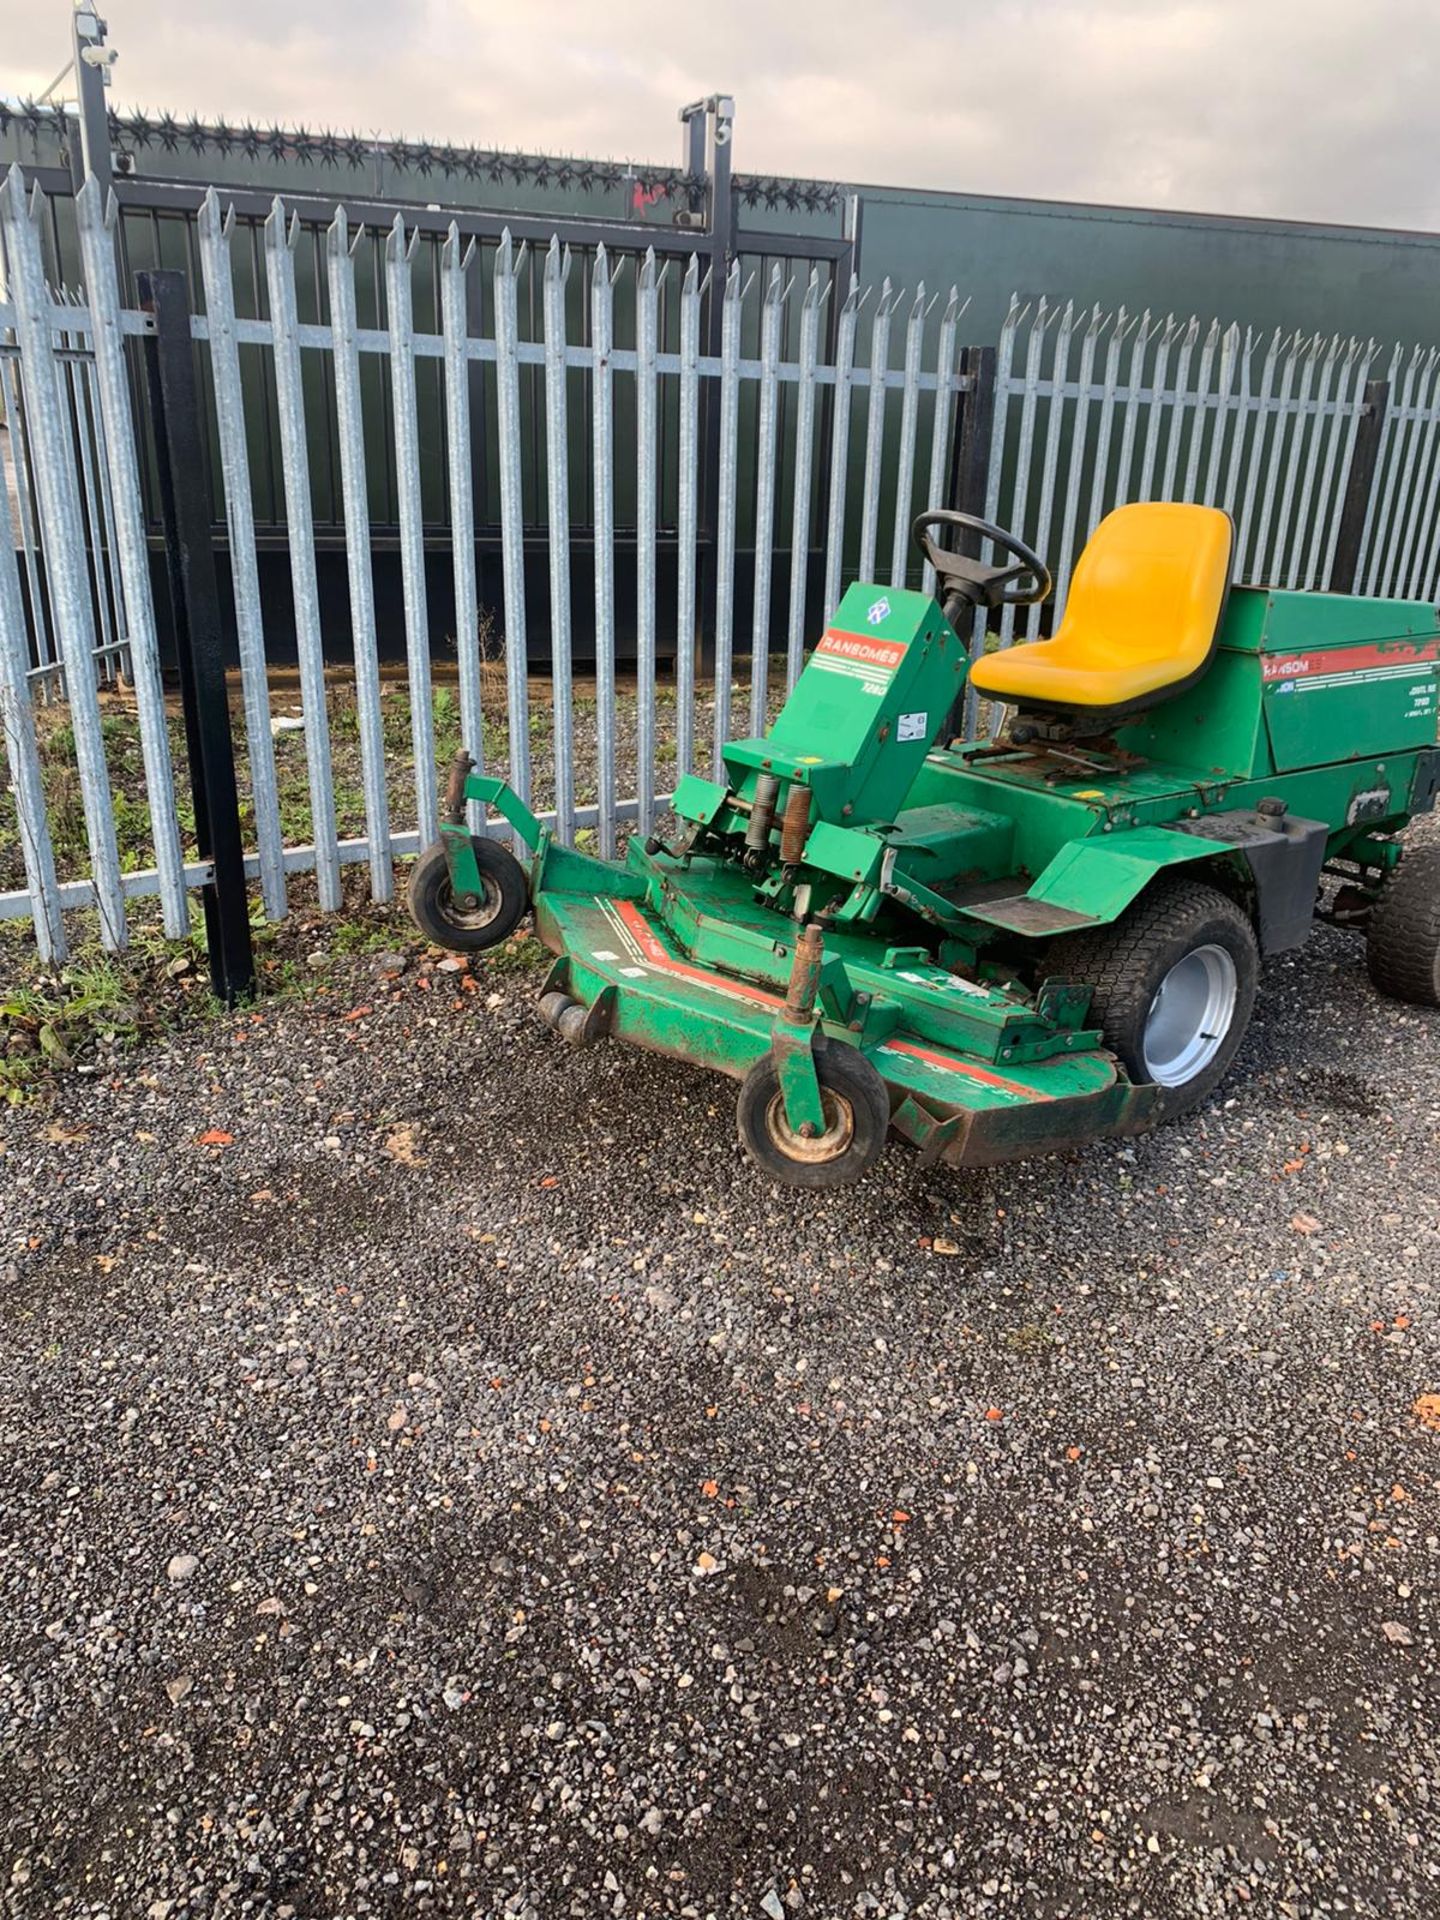 RANSOMES FRONTLINE 728D 4 WHEEL DRIVE DIESEL ROTARY MOWER OUTFRONT DECK 4WD *PLUS VAT* - Image 6 of 10